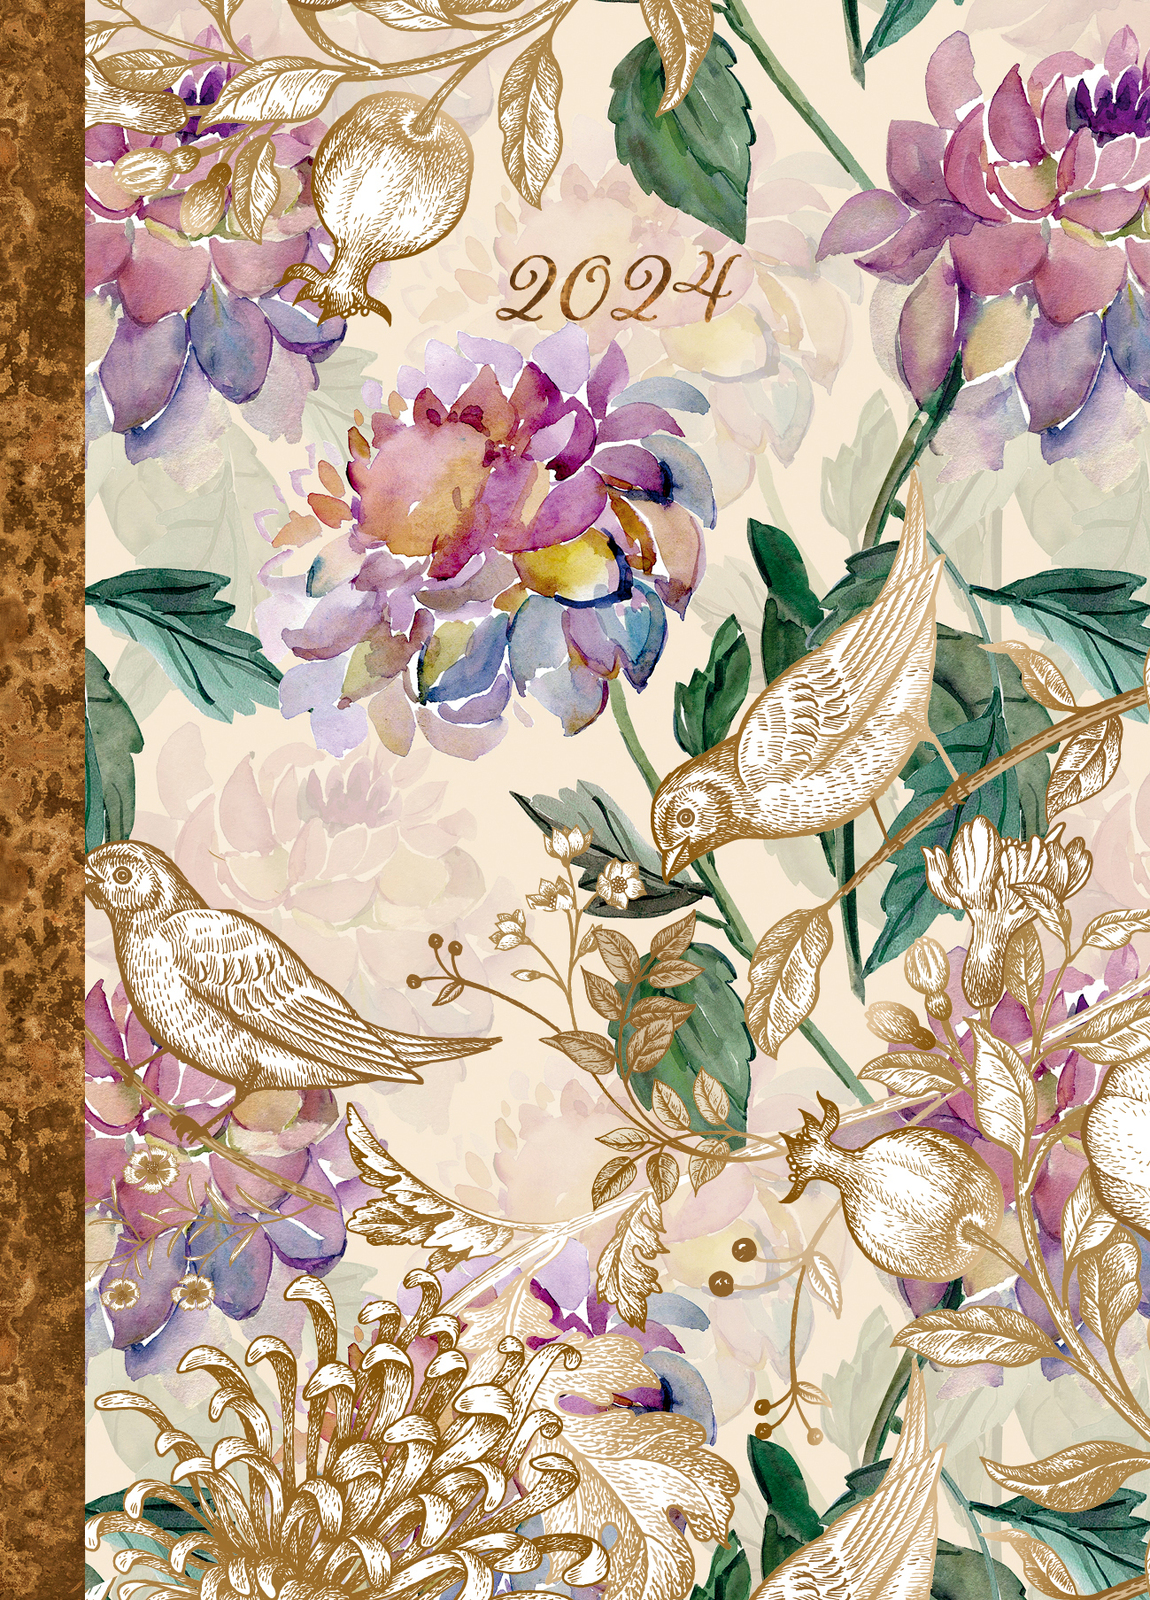 Blooming Gorgeous – 2024 Premium A6 Flexi Pocket Diary Planner New Year Gift